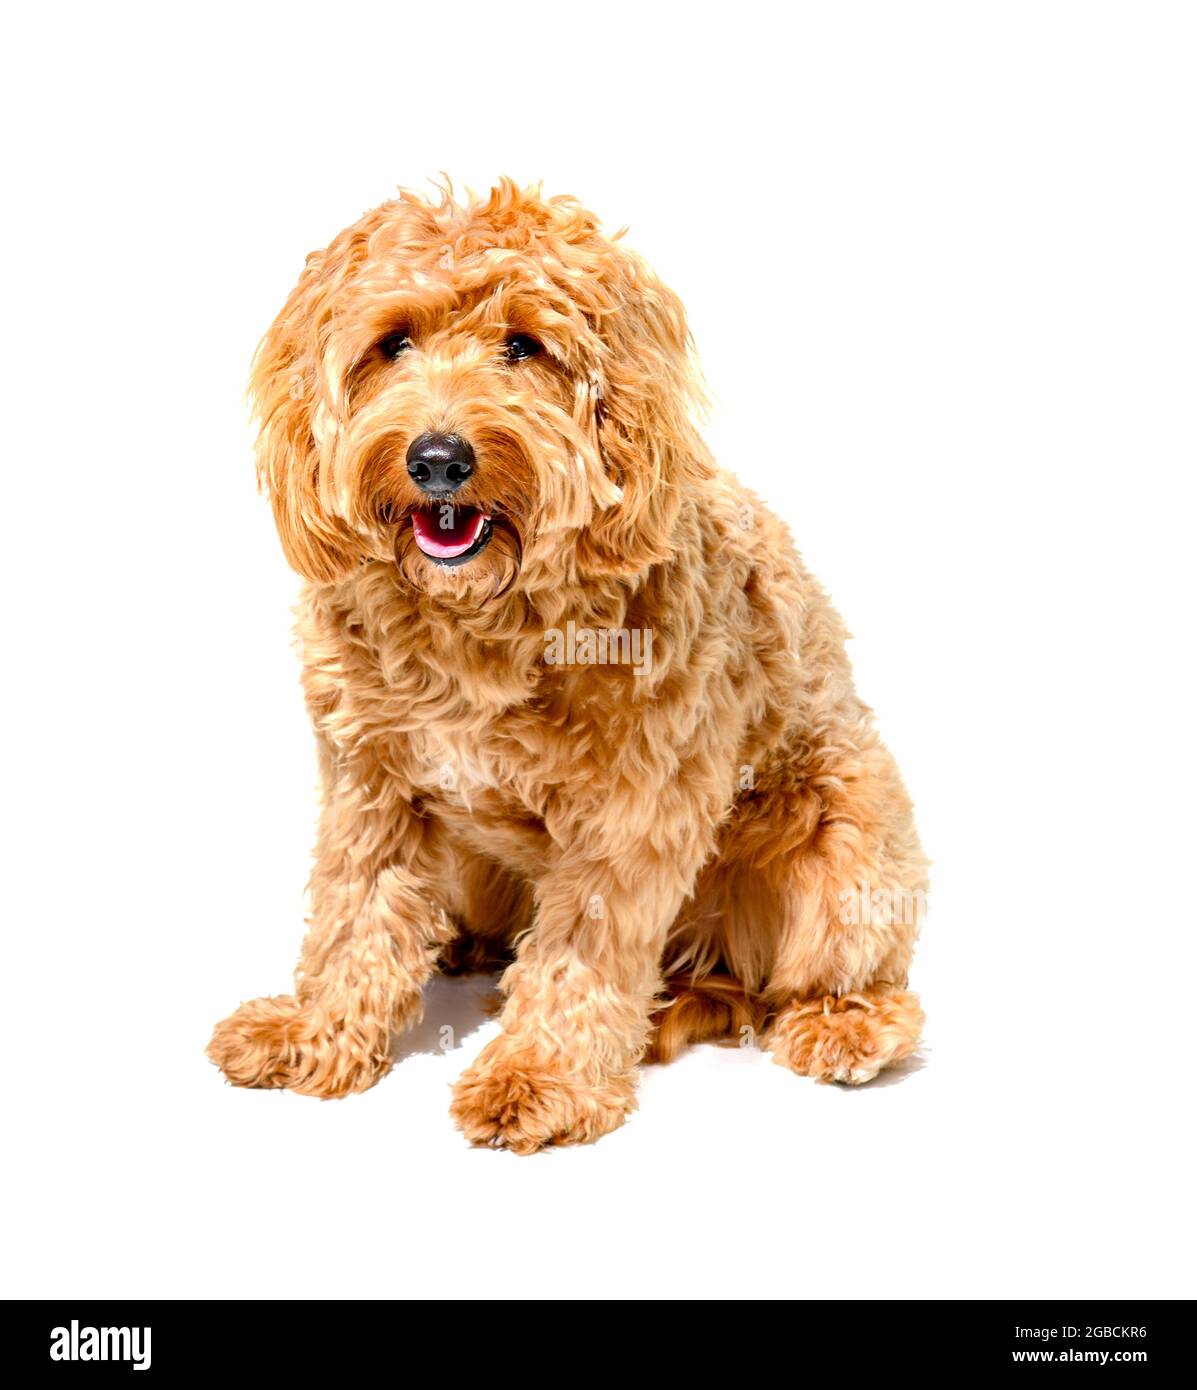 Charlie a one year old a tan coloured cocker spaniel x poodle crossbreed dog or cockerpoo on a white background Stock Photo